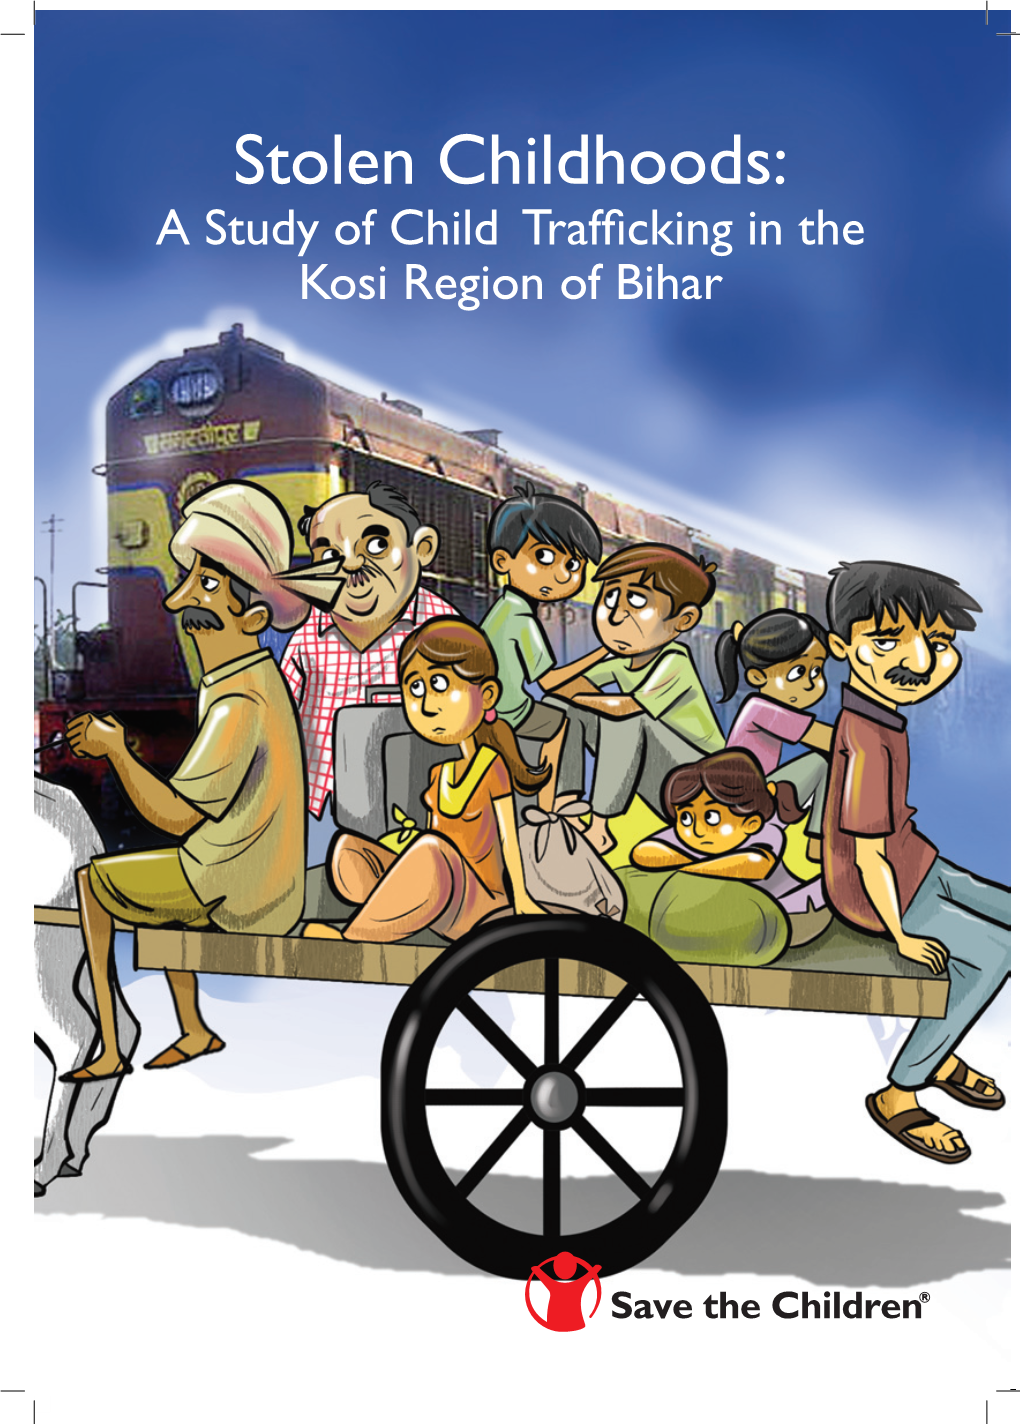 A Study of Child Trafficking in the Kosi Region of Bihar